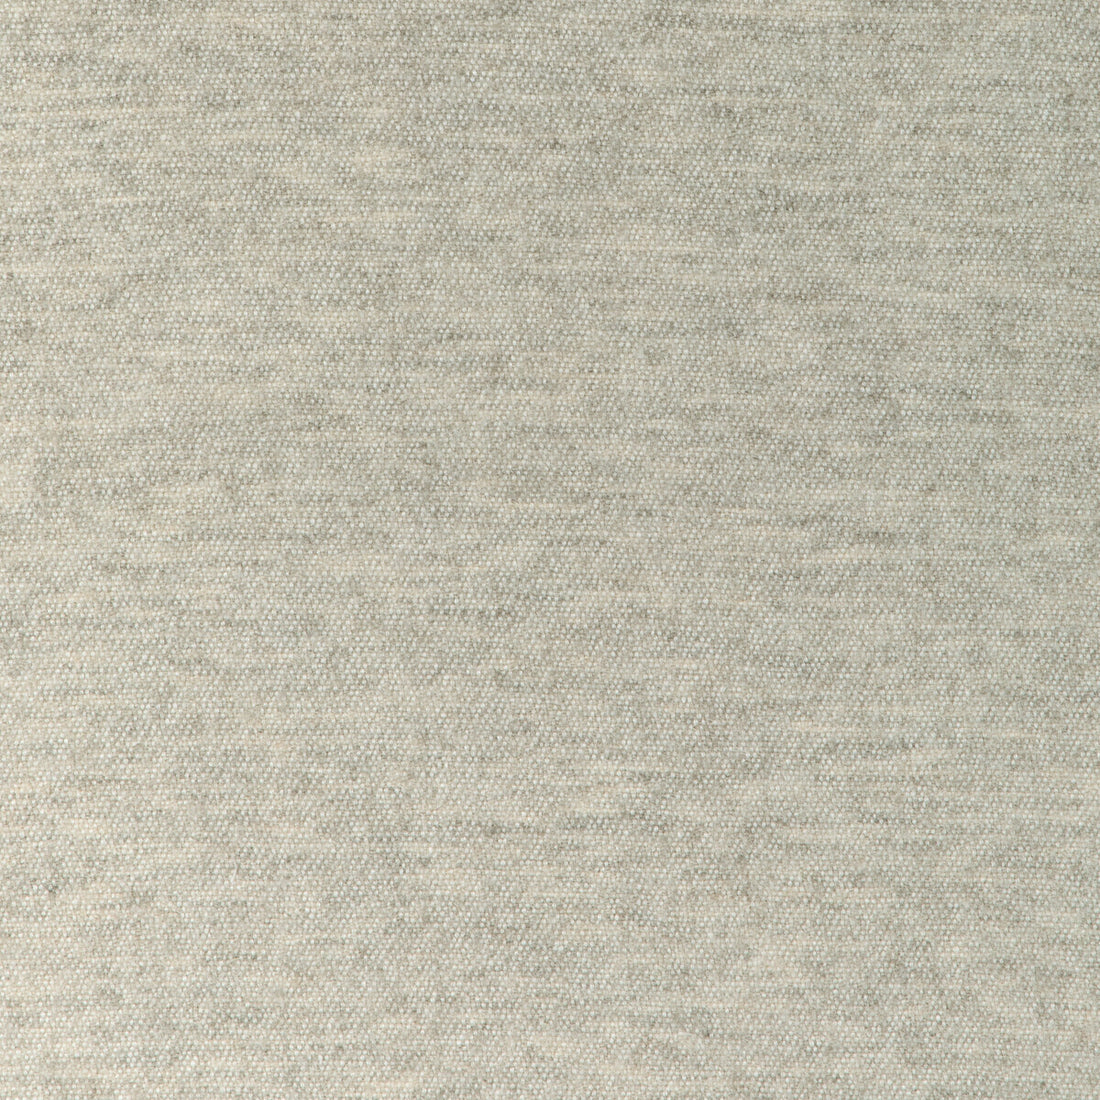 Alpaca Breeze fabric in stone color - pattern 36906.11.0 - by Kravet Couture in the Atelier Weaves collection